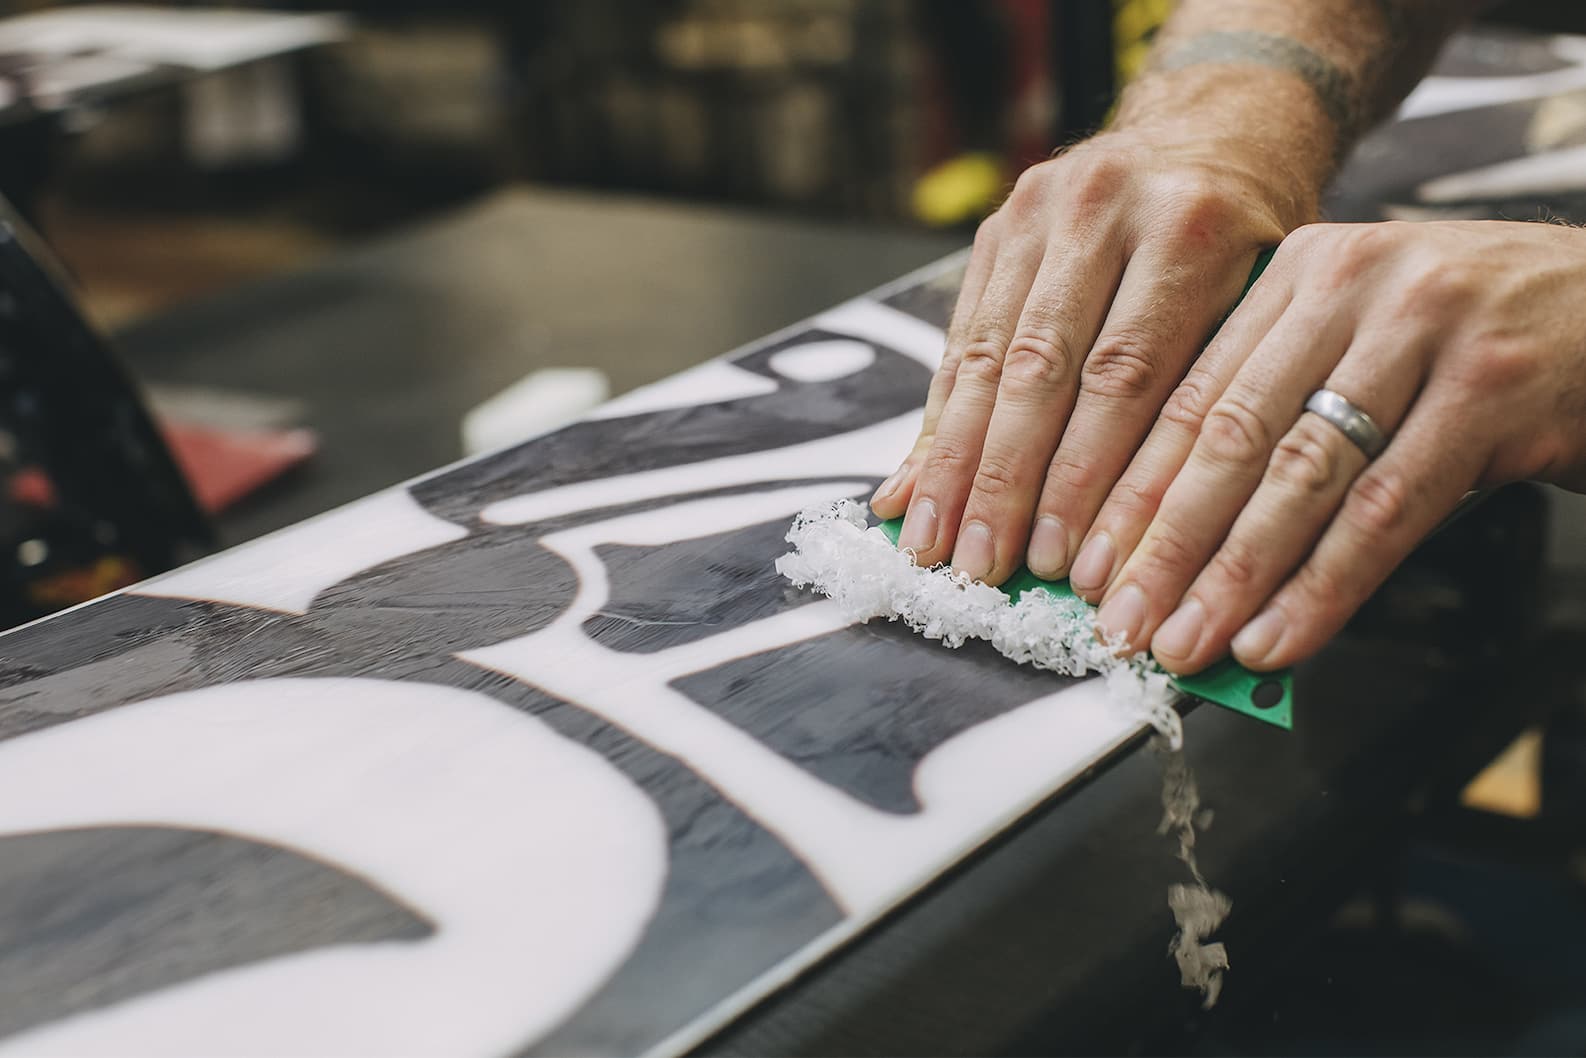 How to Wax a Snowboard: 6 Quick & Easy Steps